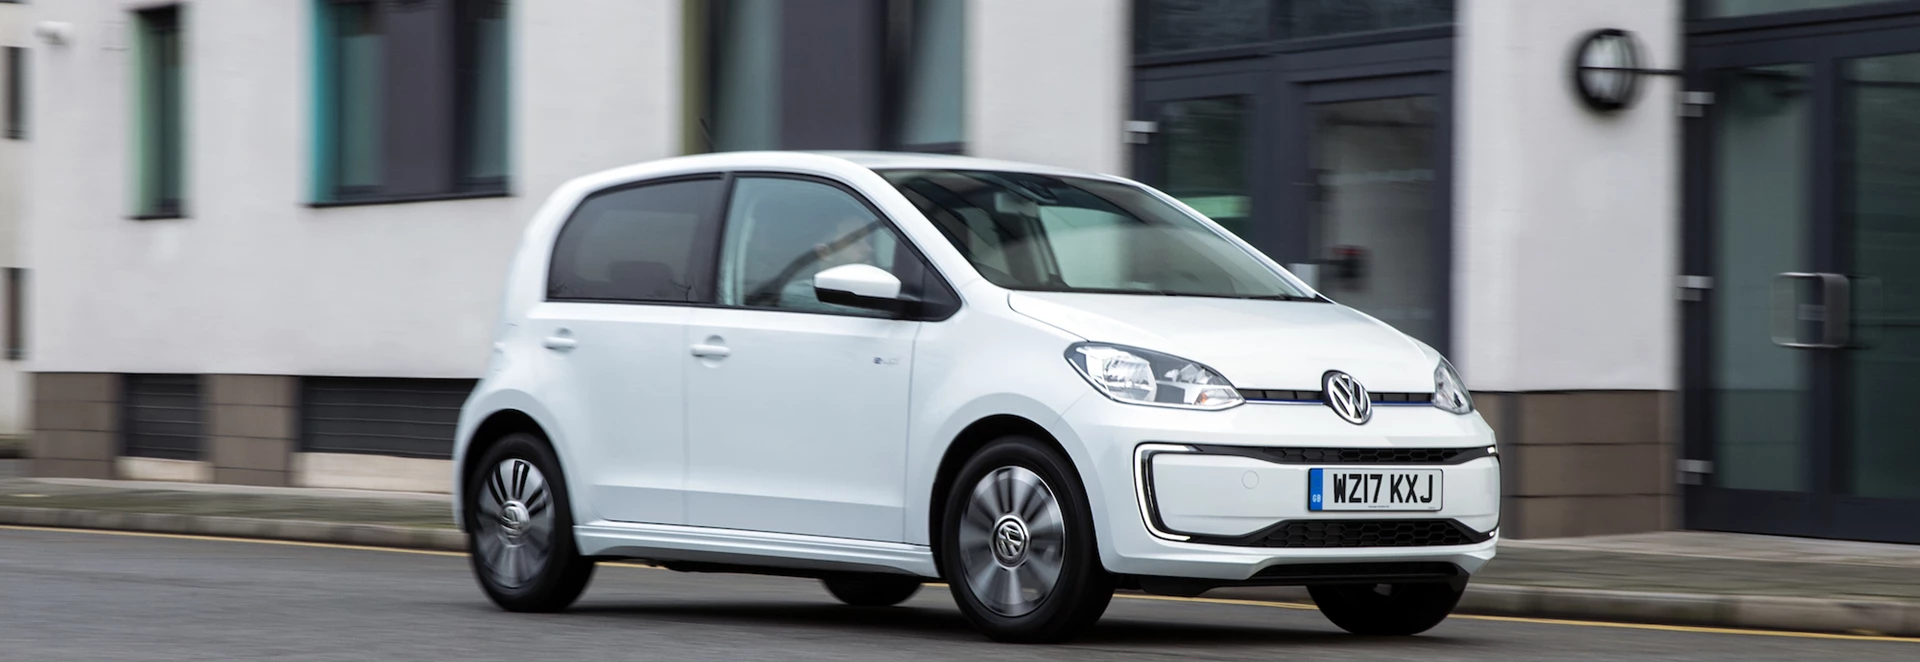 Volkswagen to unveil facelifted e-up! at 2019 Frankfurt Motor Show